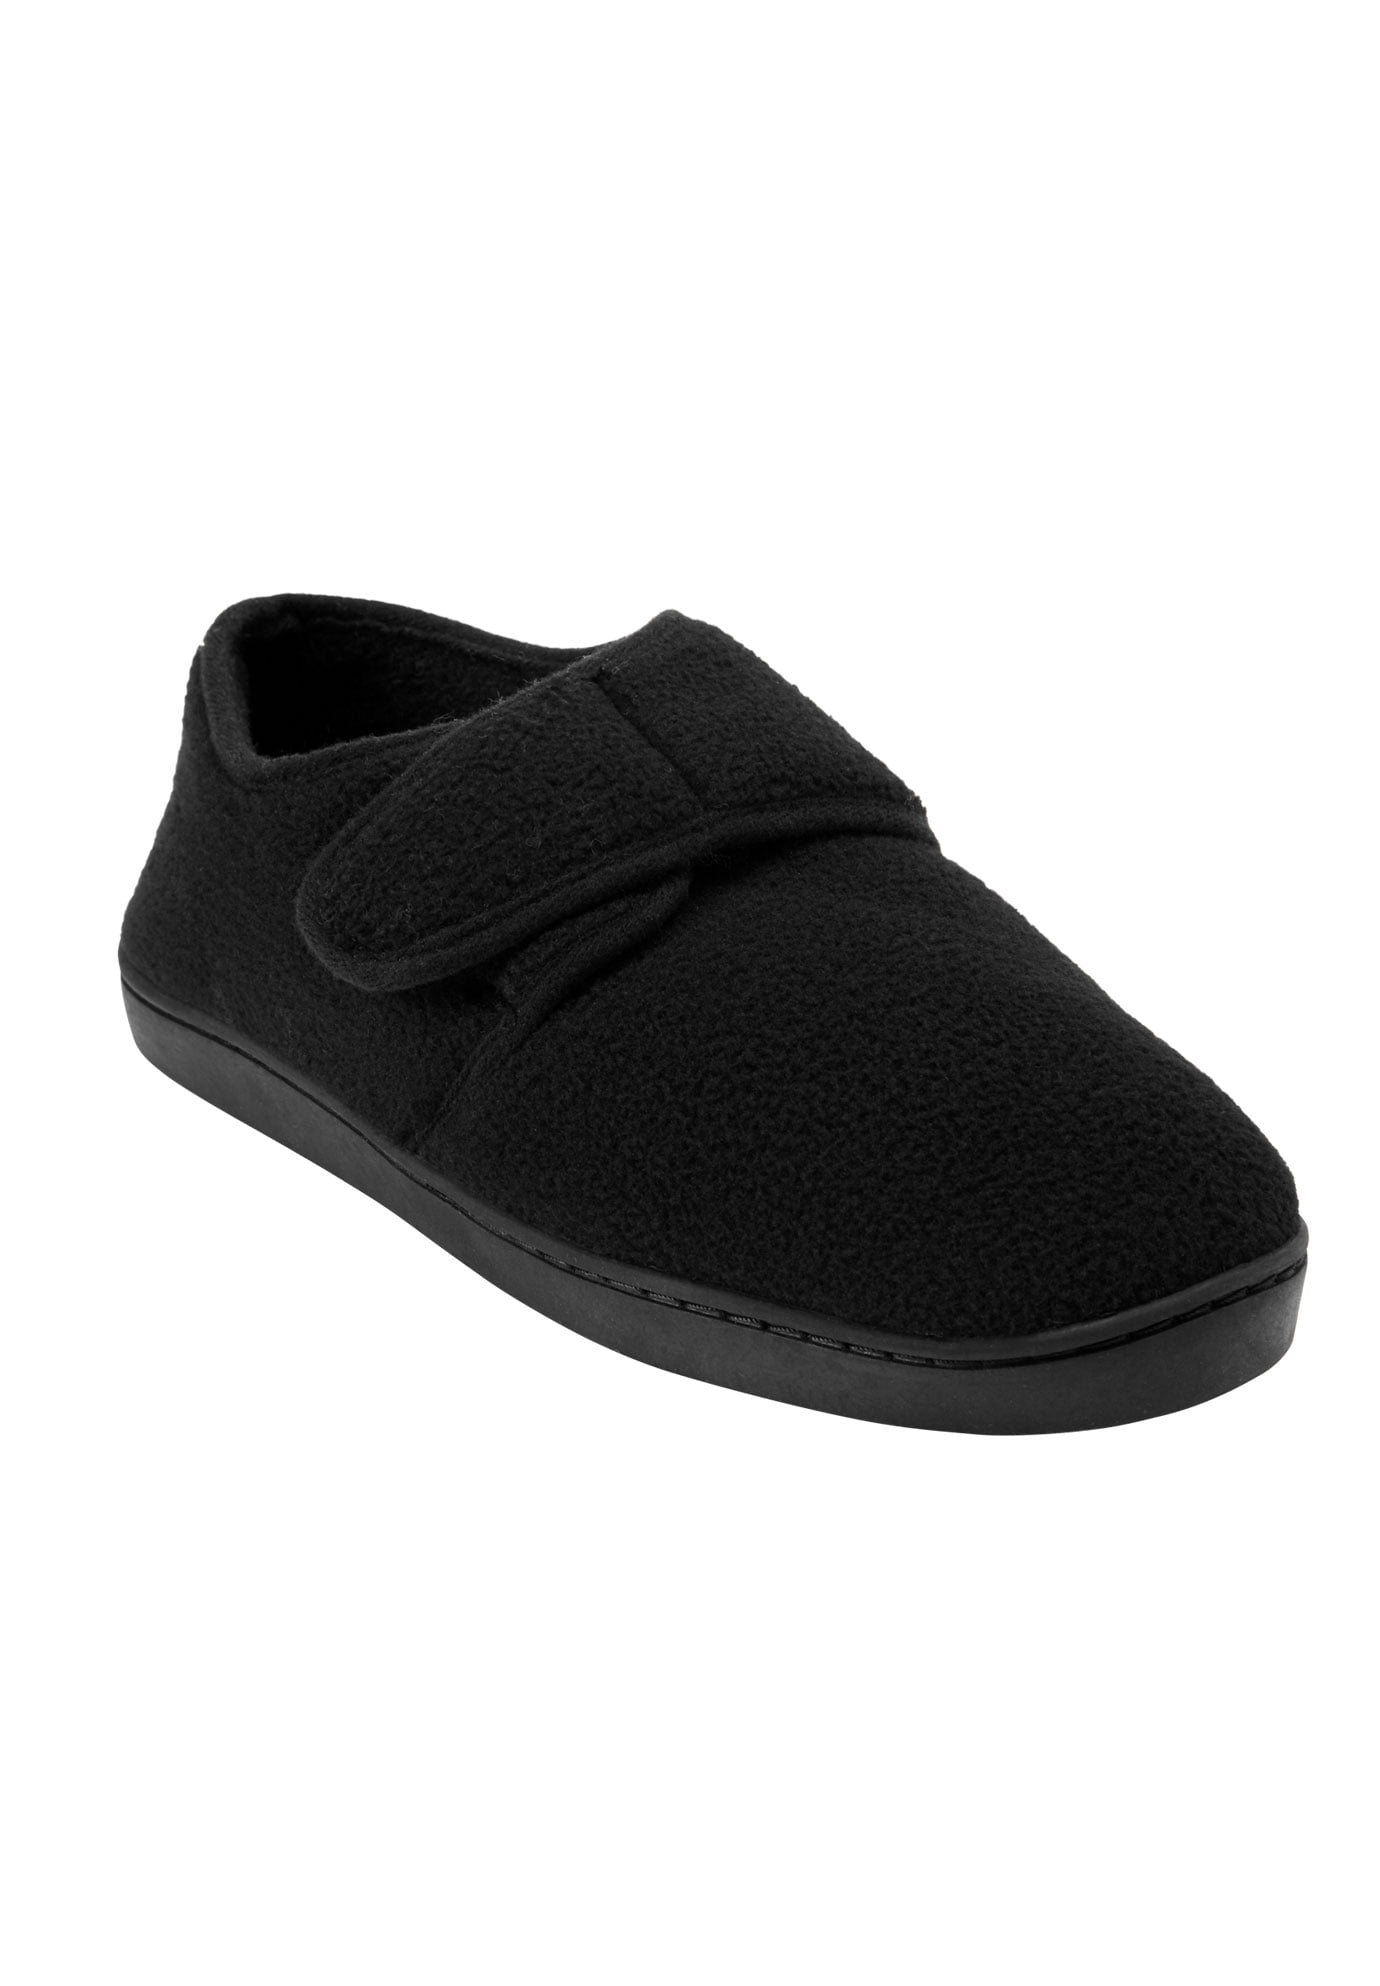 mens slippers with velcro closure